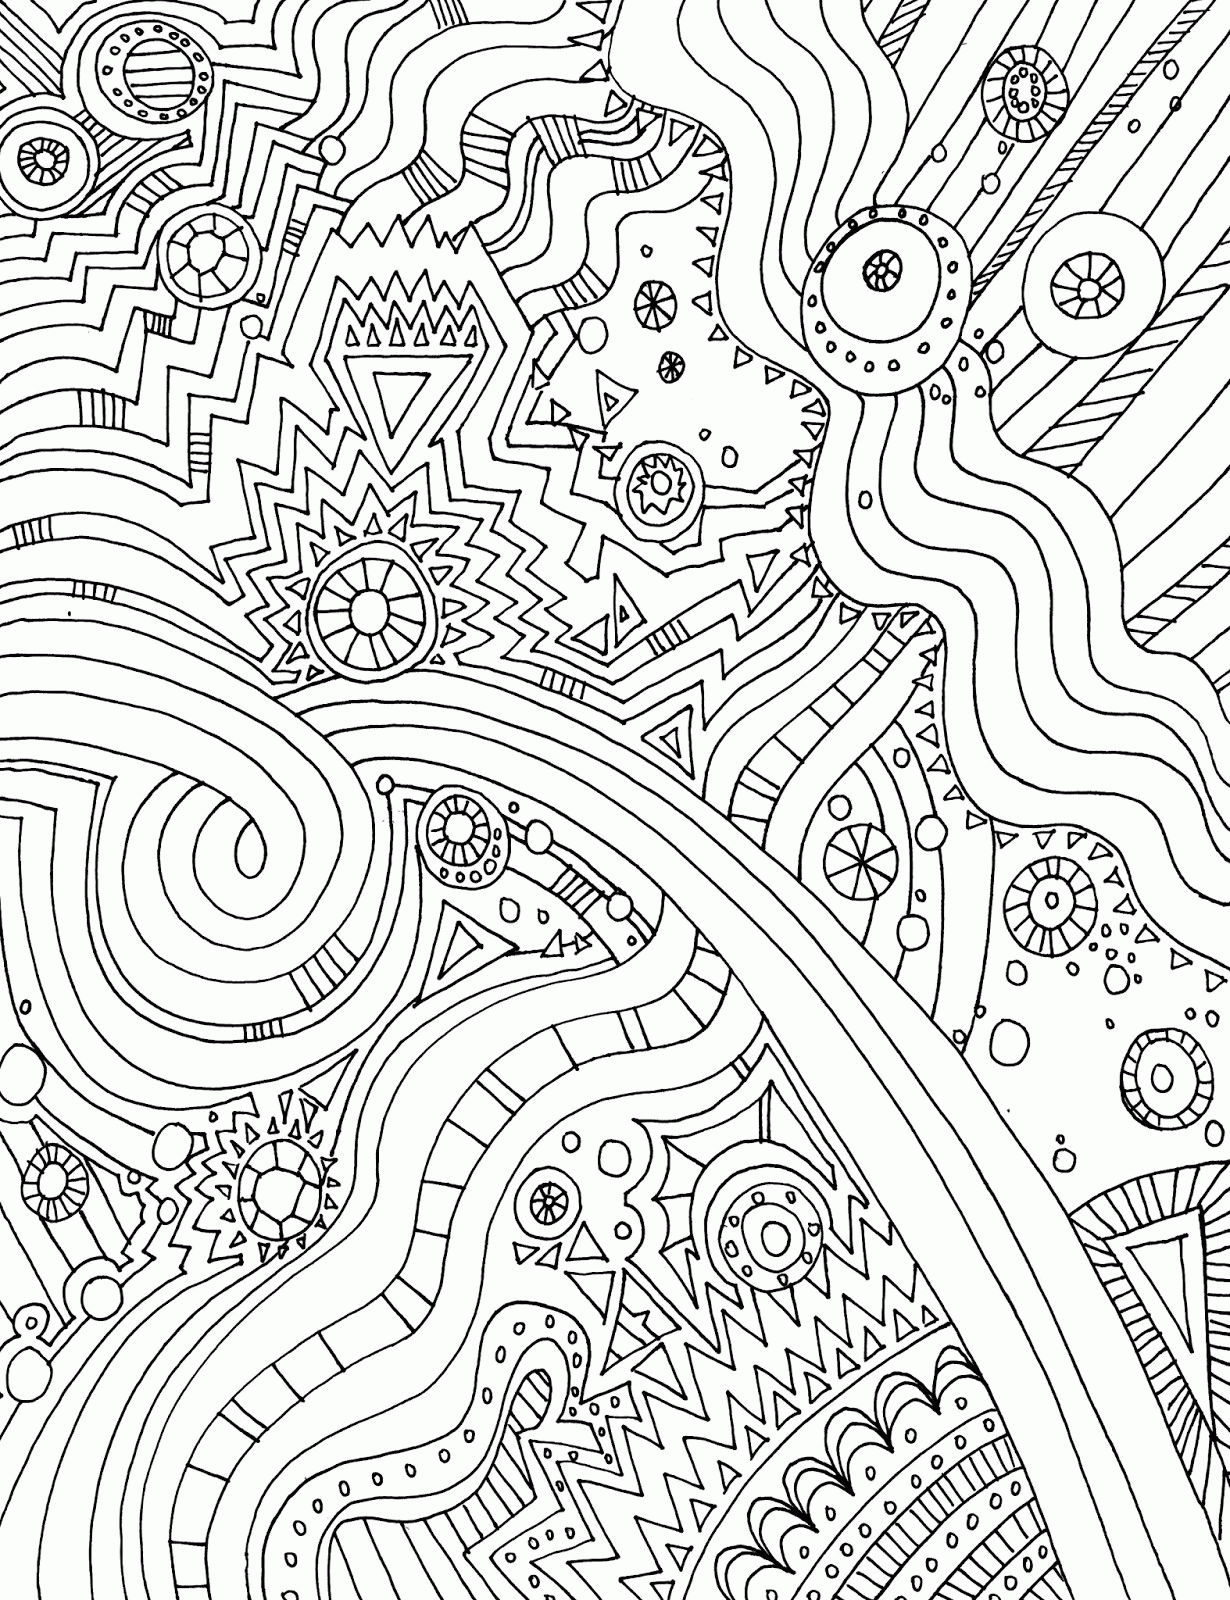 super-hard-abstract-coloring-pages-for-adults-4